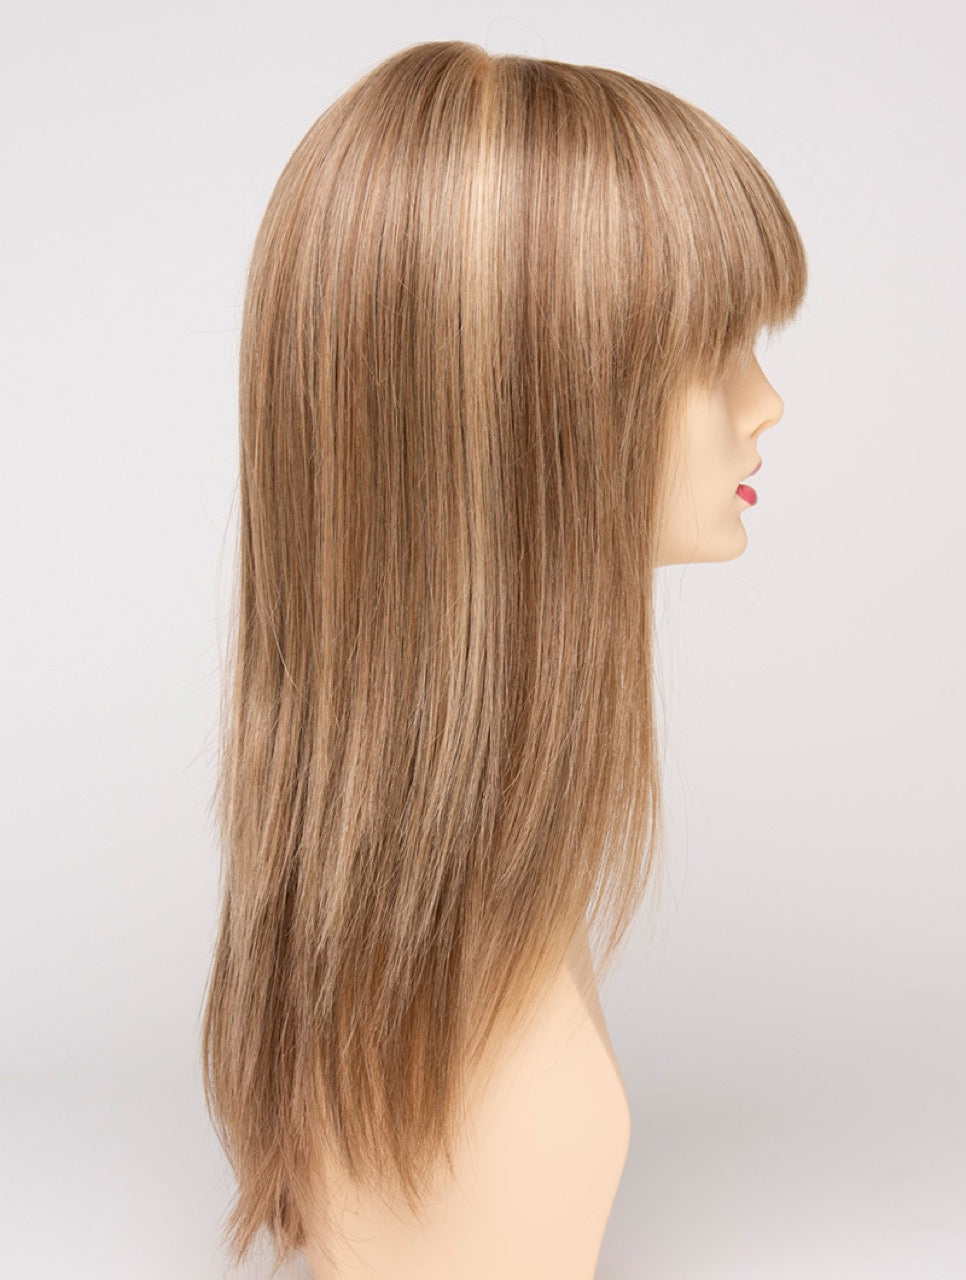 Ginger Cream | 41AE/613 | Cool Light Blonde with Highlights